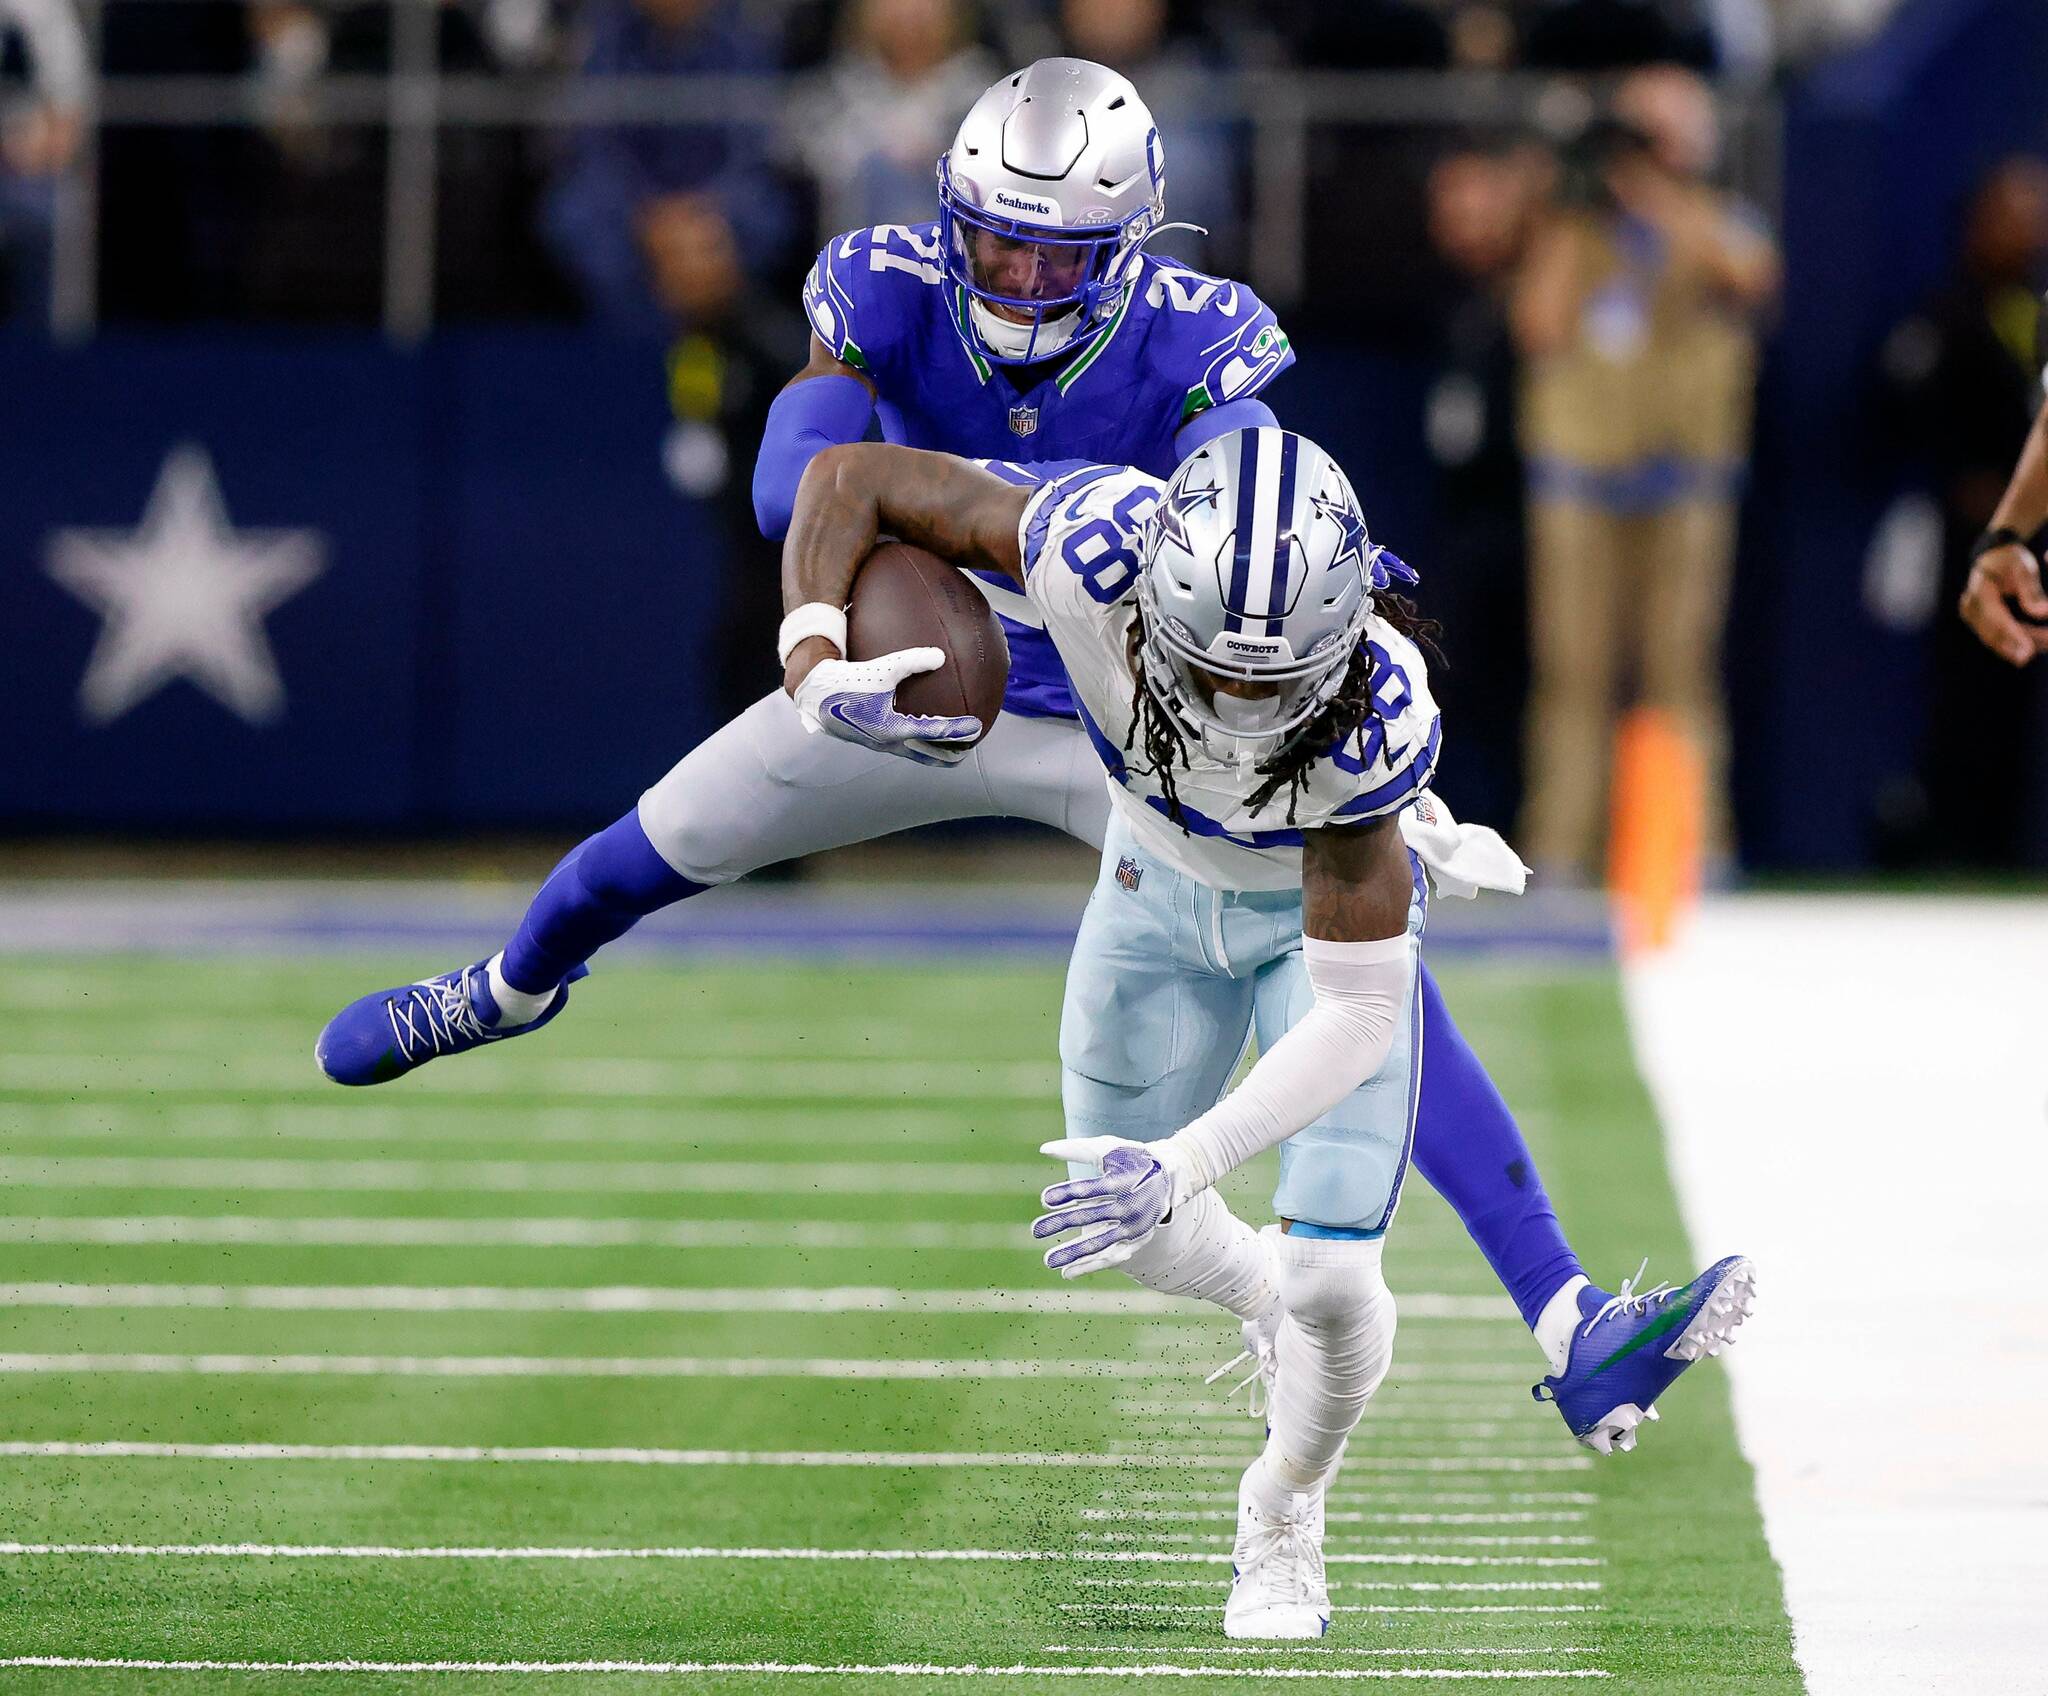 Seattle Seahawks cornerback Devon Witherspoon (21) rides Dallas Cowboys wide receiver CeeDee Lamb (88) out of bounds following a fourth quarter completion at AT&T Stadium in Arlington, Nov. 30, 2023. The Cowboys won, 41-35. (Tom Fox / Tribune News Service)